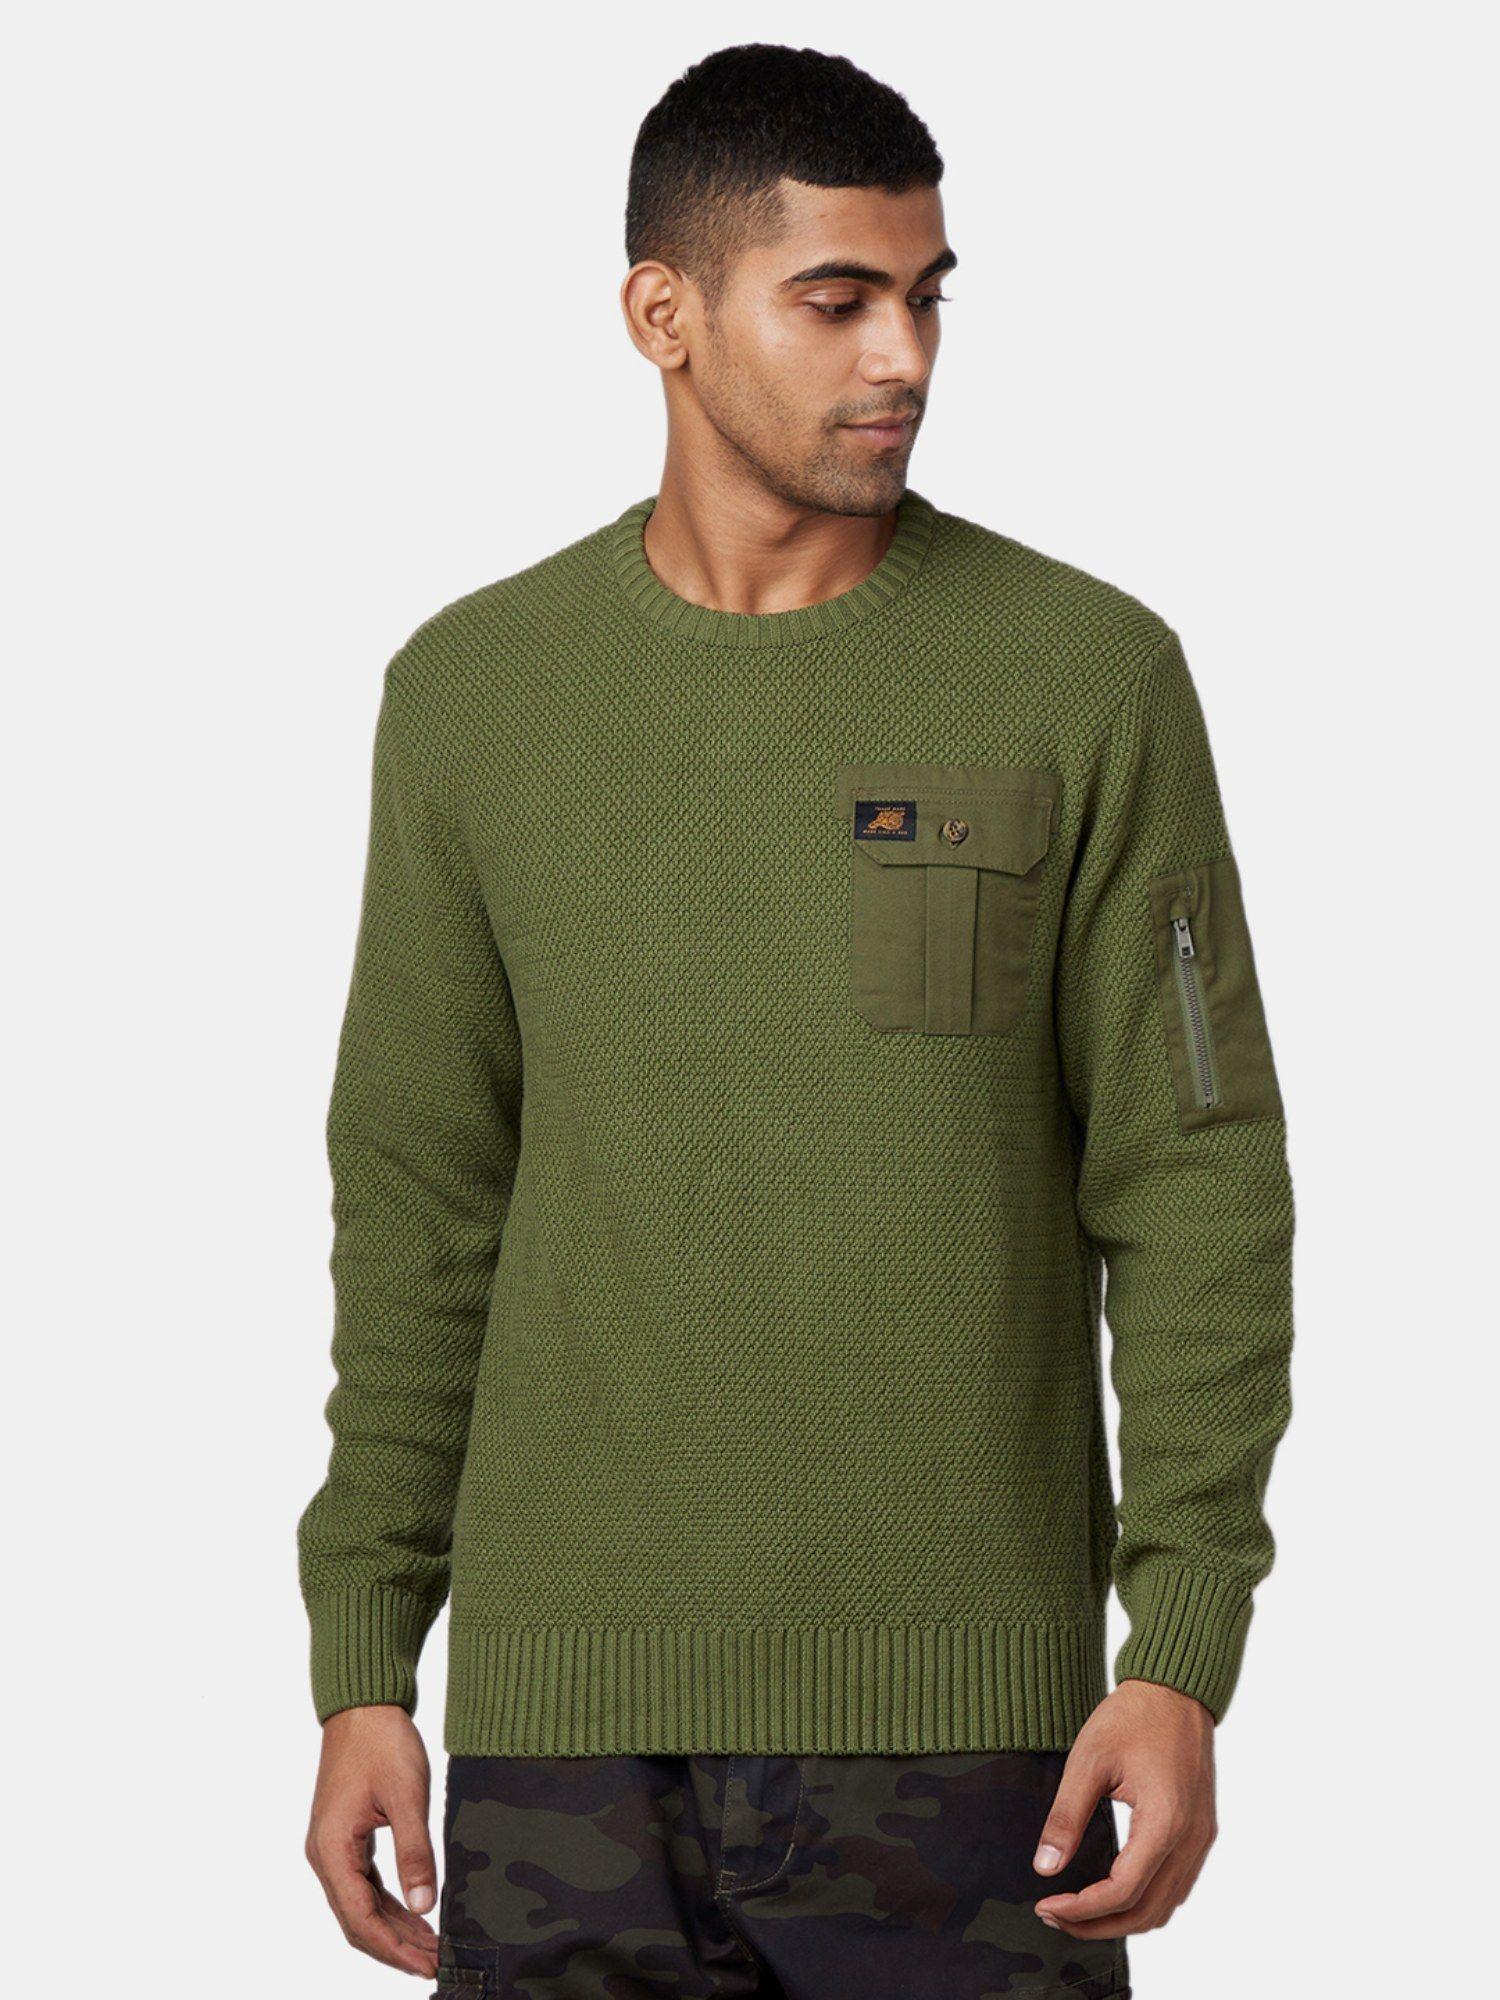 military olive sweater